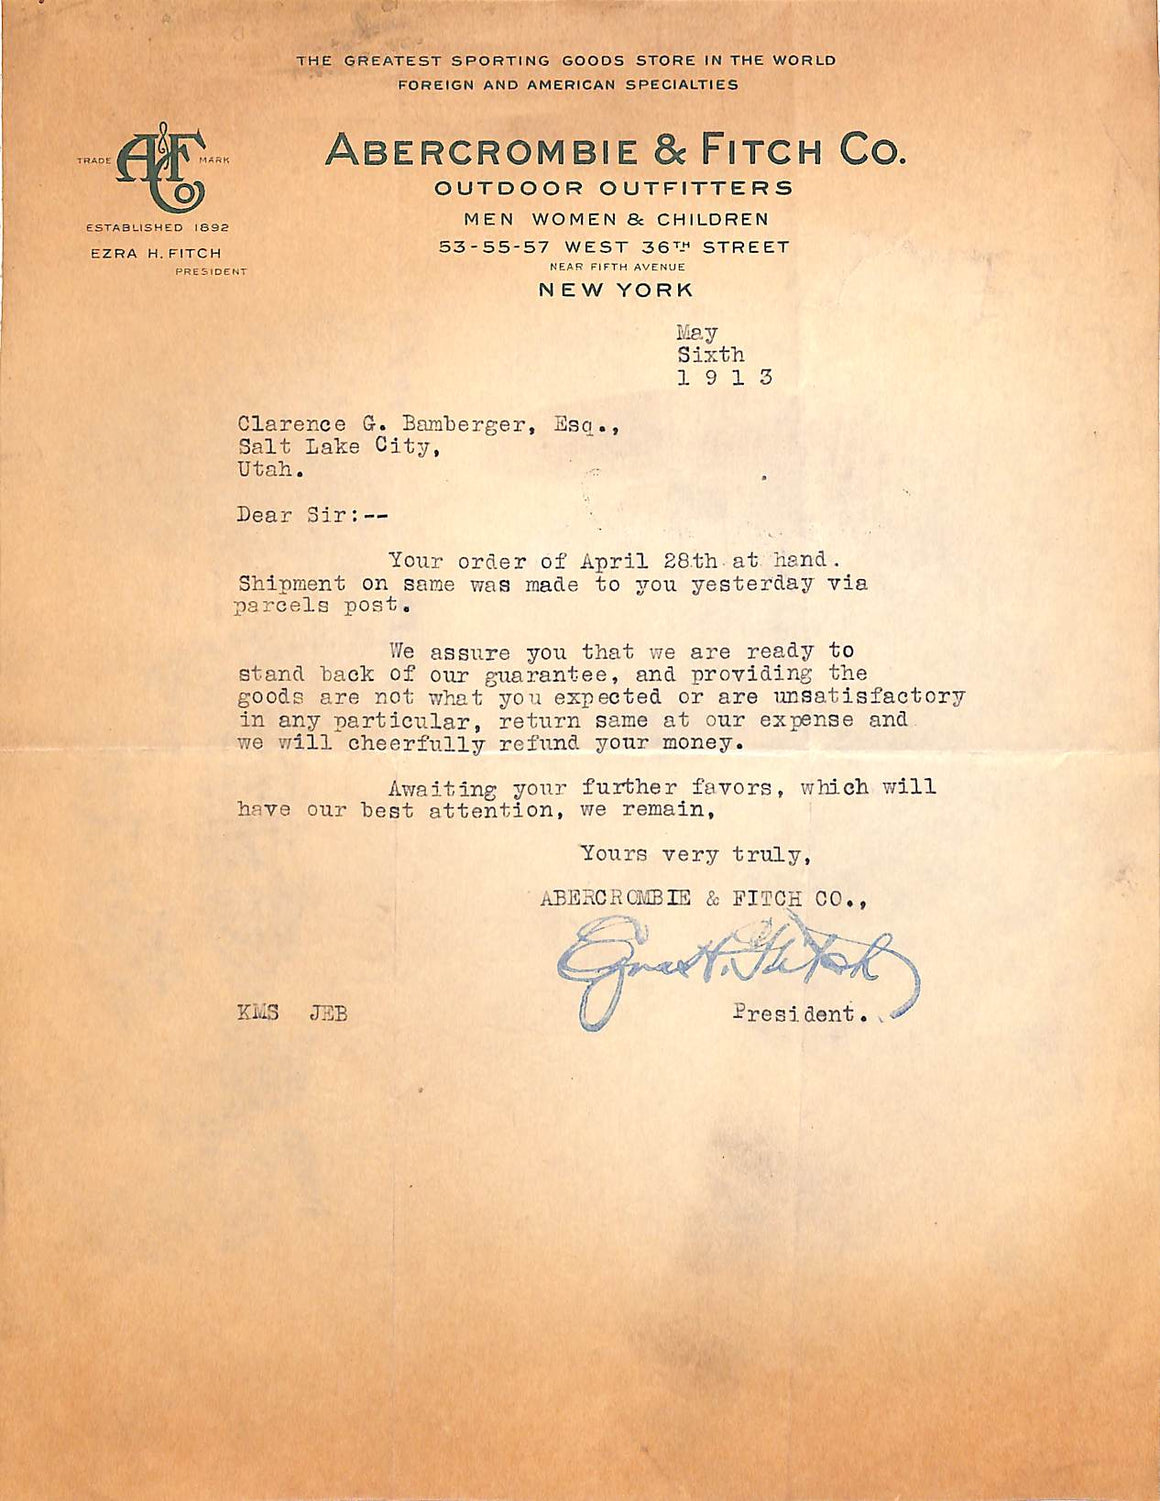 "Abercrombie & Fitch Co. Hand-Typed Letter" Dated May 6, 1913 (SOLD)